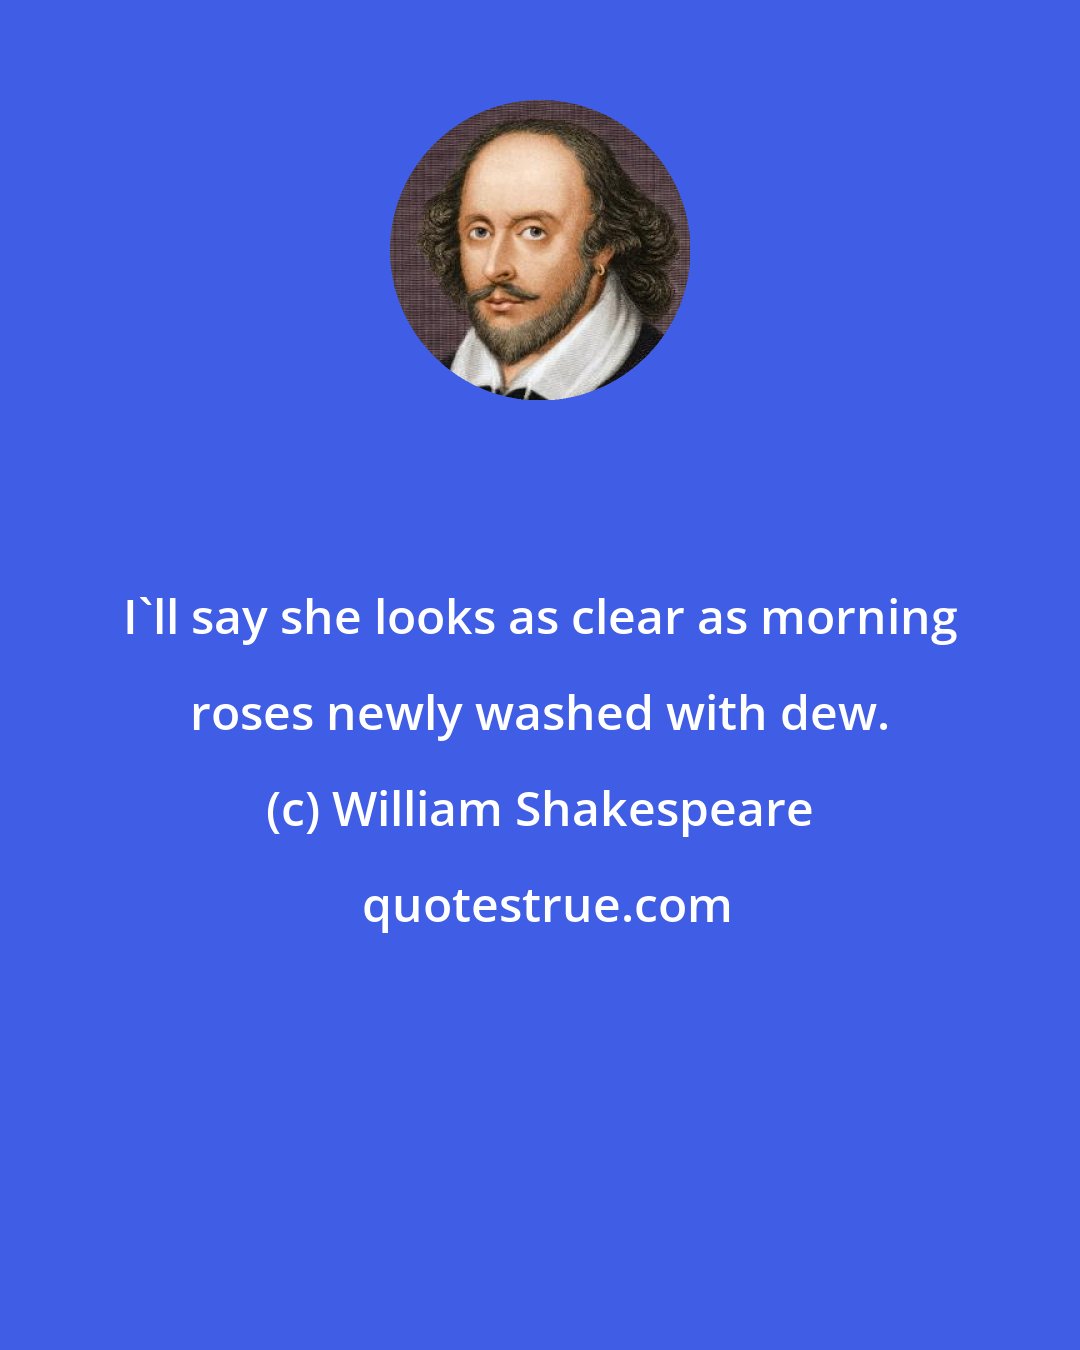 William Shakespeare: I'll say she looks as clear as morning roses newly washed with dew.